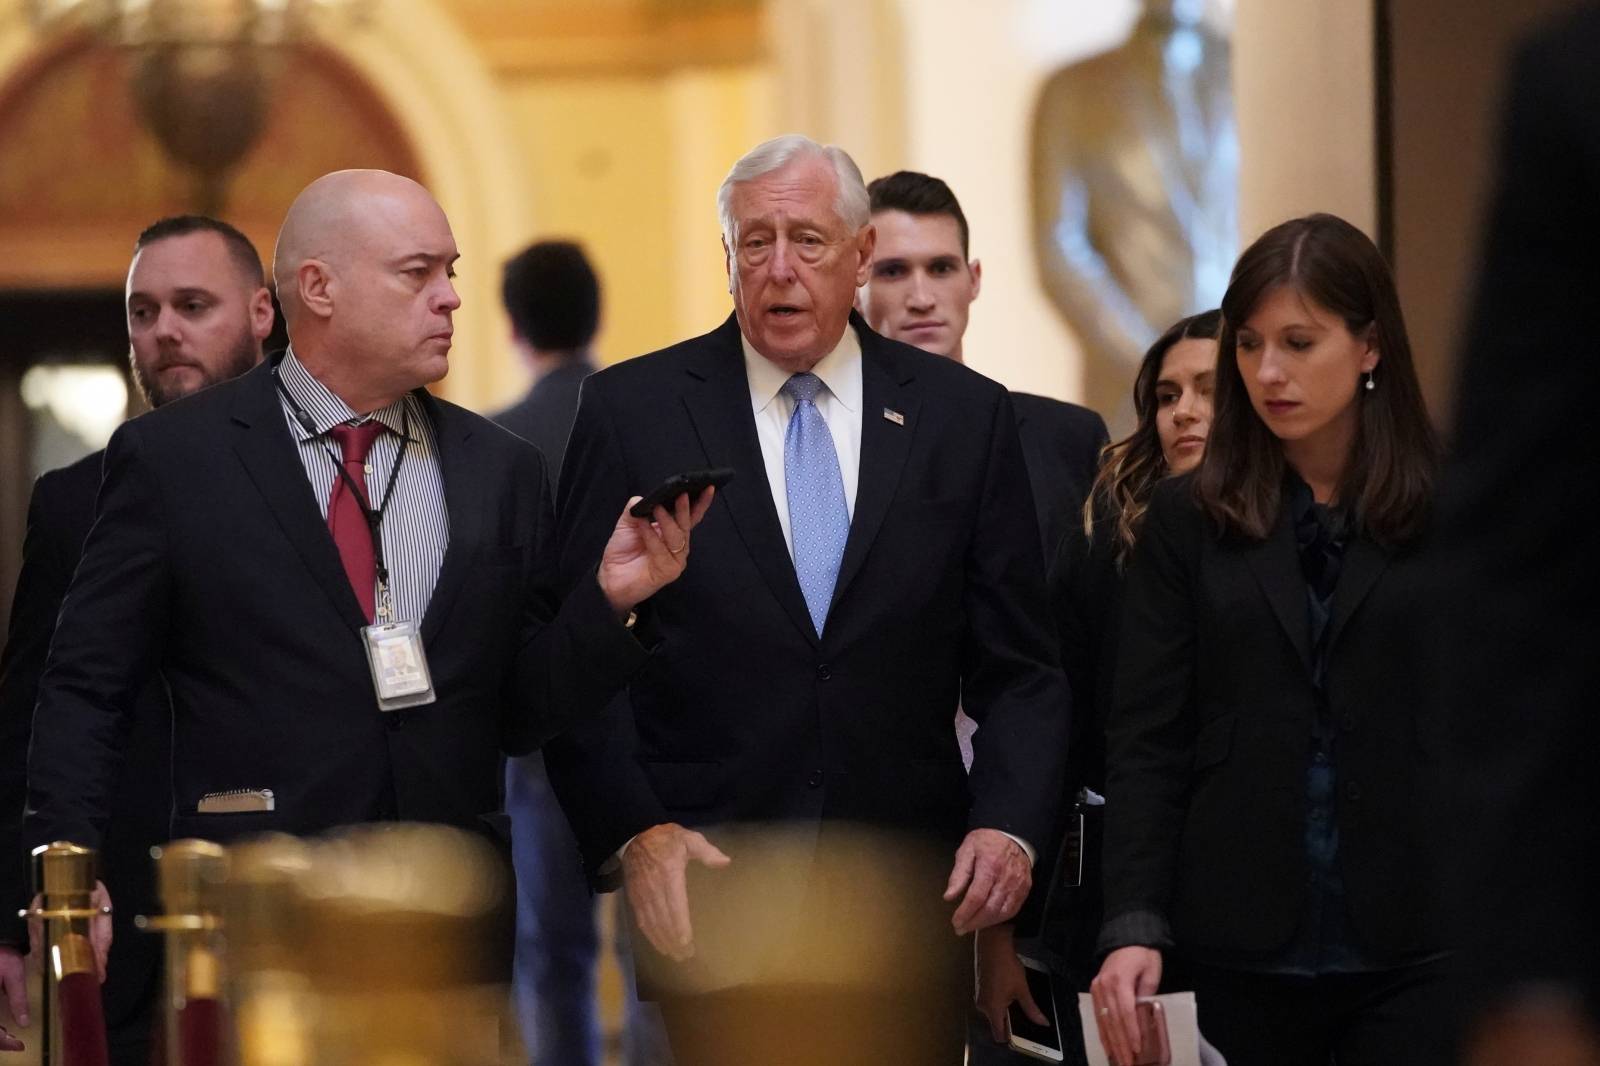 House Majority Leader Hoyer speaks to reporters inside Statuary Hall  prior voting in the U.S. House of Representatives on two articles of impeachment against U.S. President Donald Trump at the U.S. Capitol in Washington